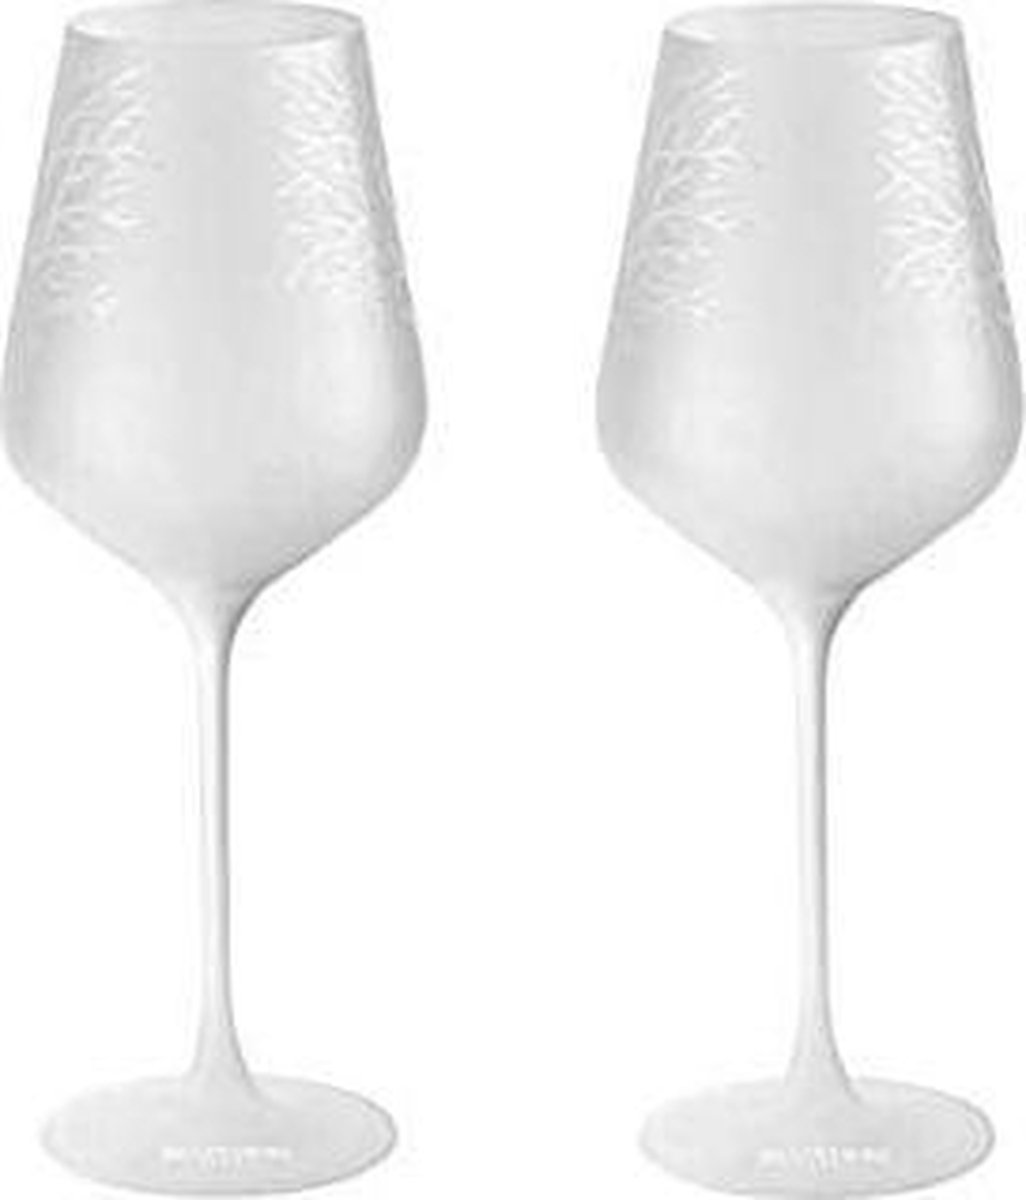 2 x Belvedere Vodka Glasses Frosted Cold Activated | bol.com